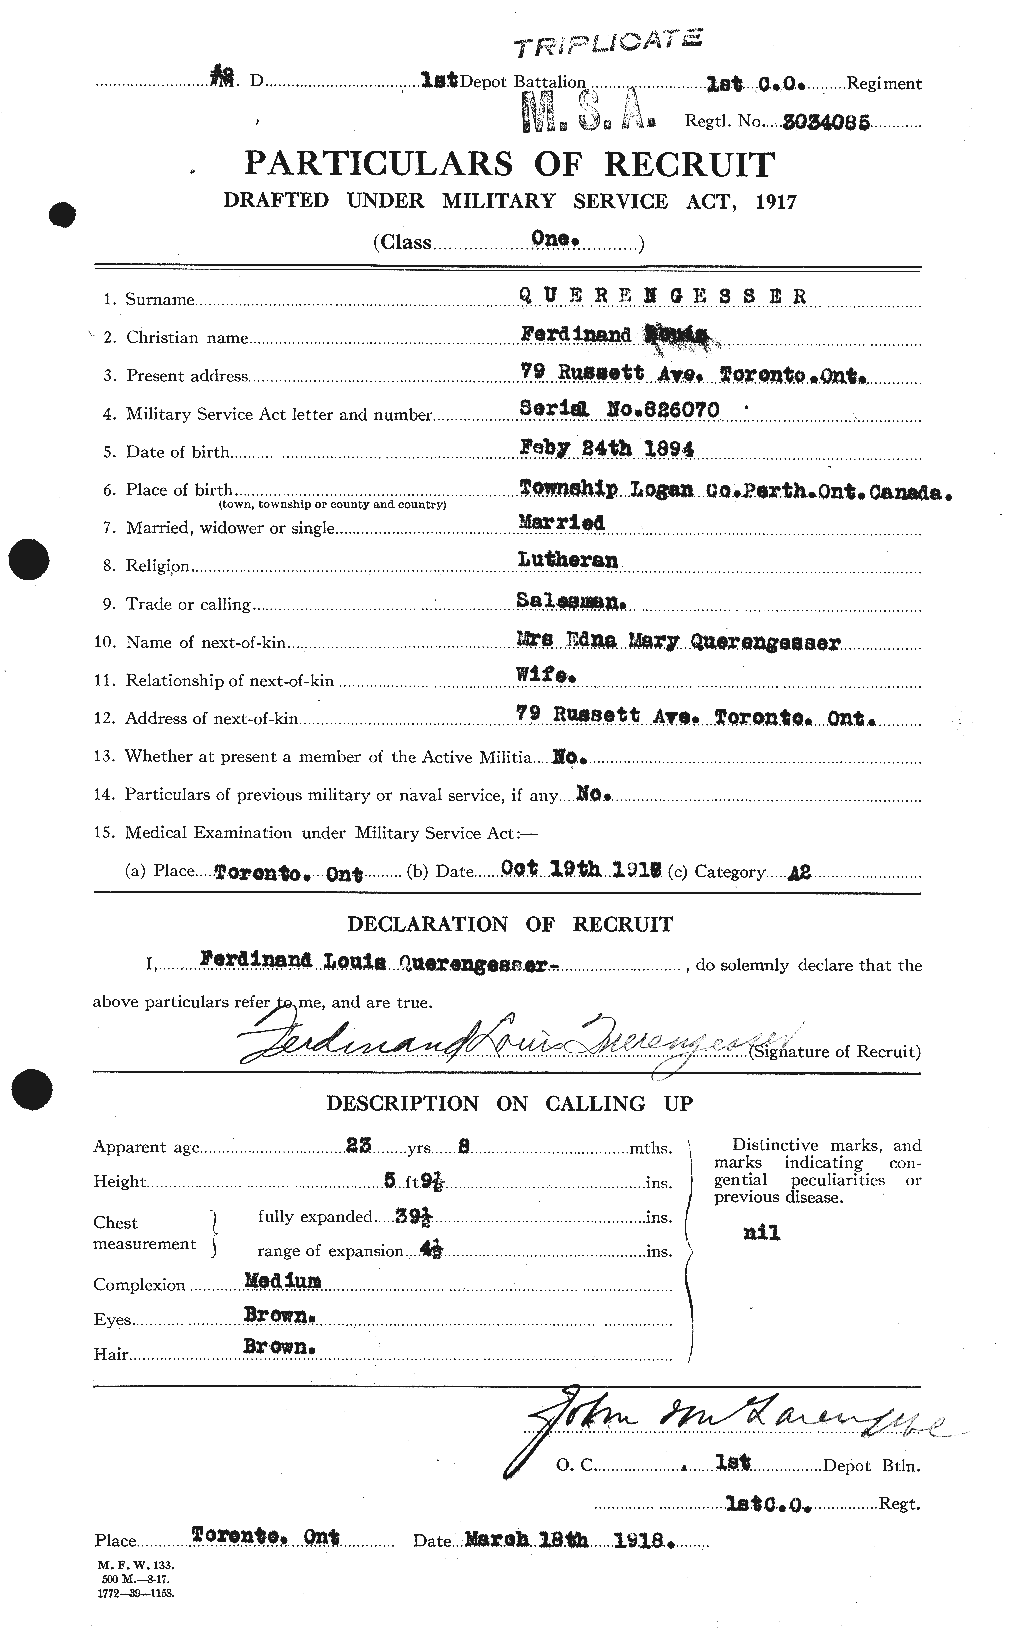 Personnel Records of the First World War - CEF 592850a